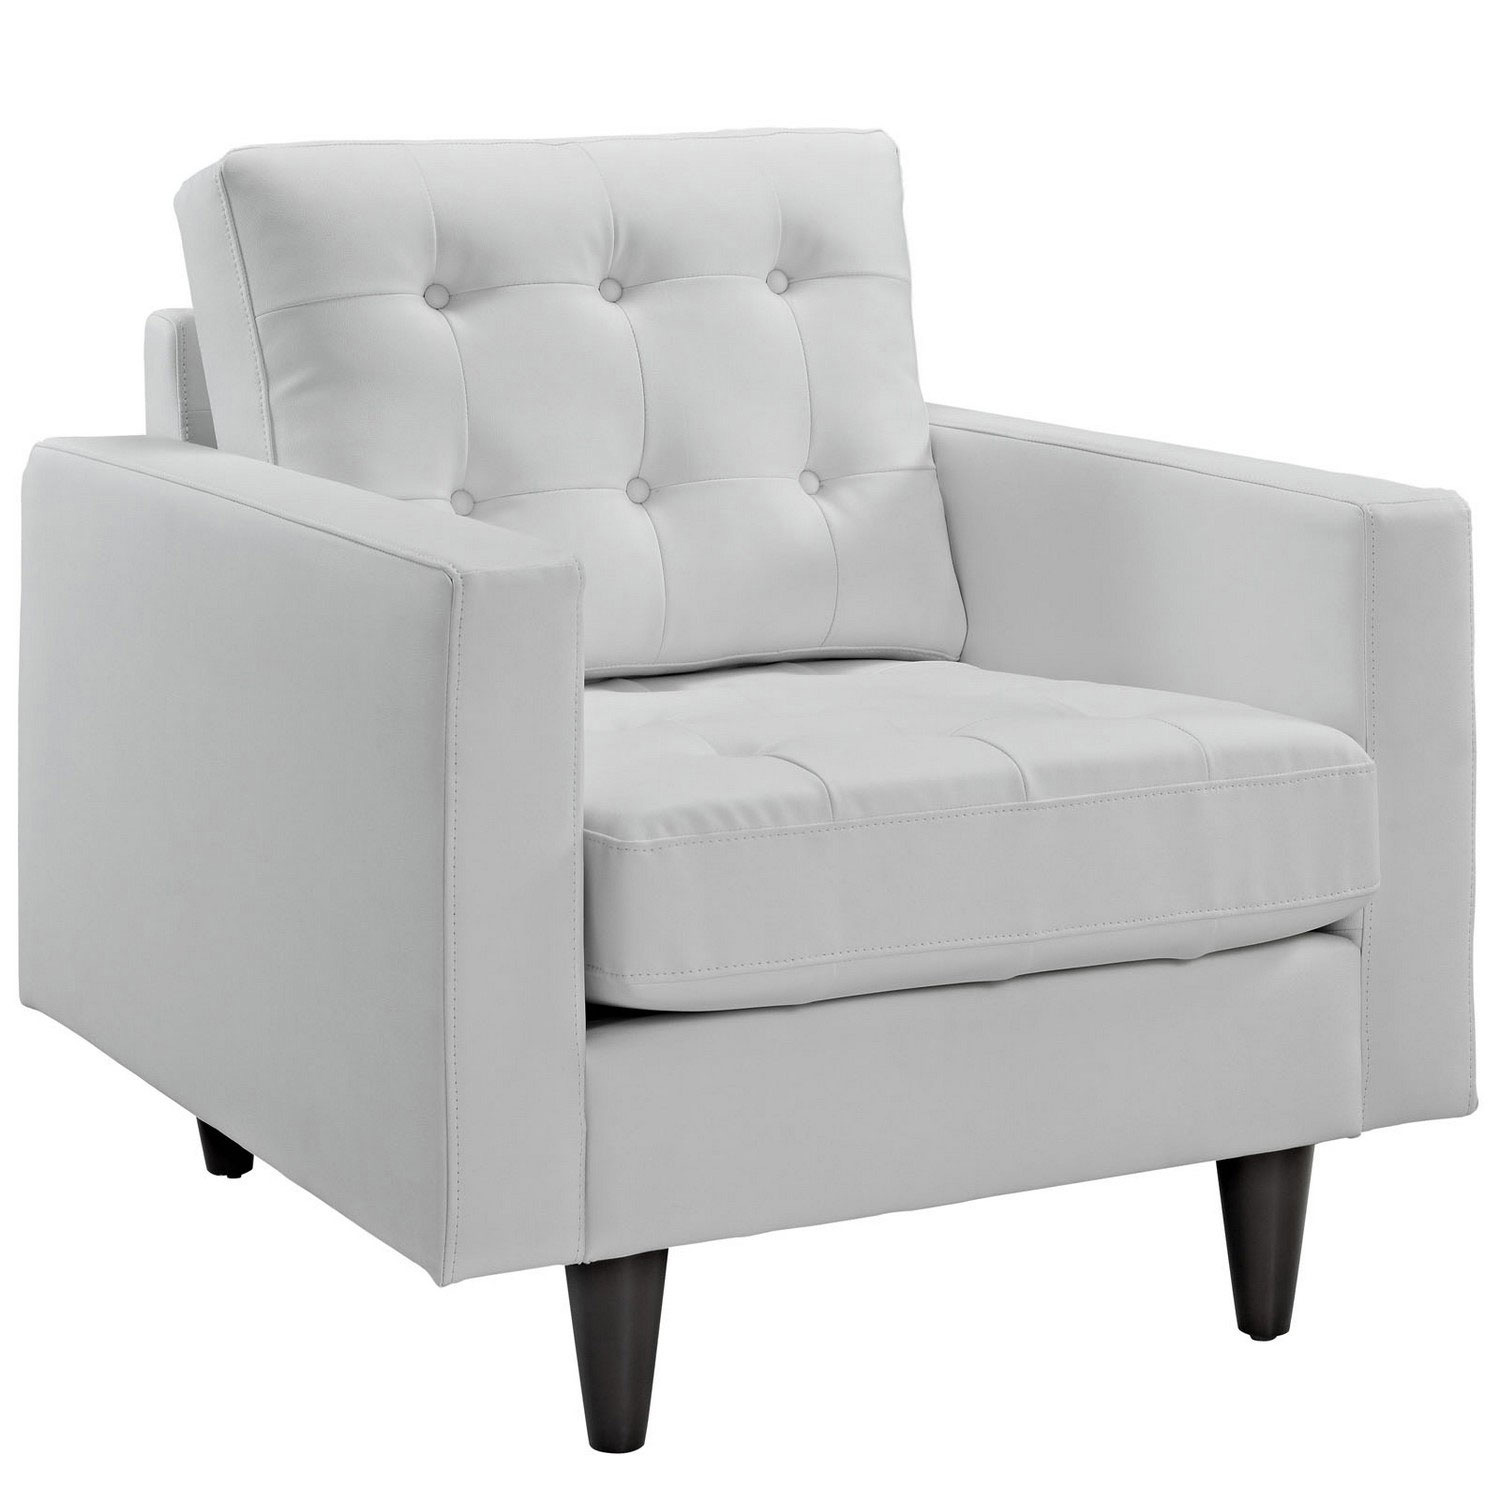 Modway Empress 3PC Sofa and Armchairs Set- White